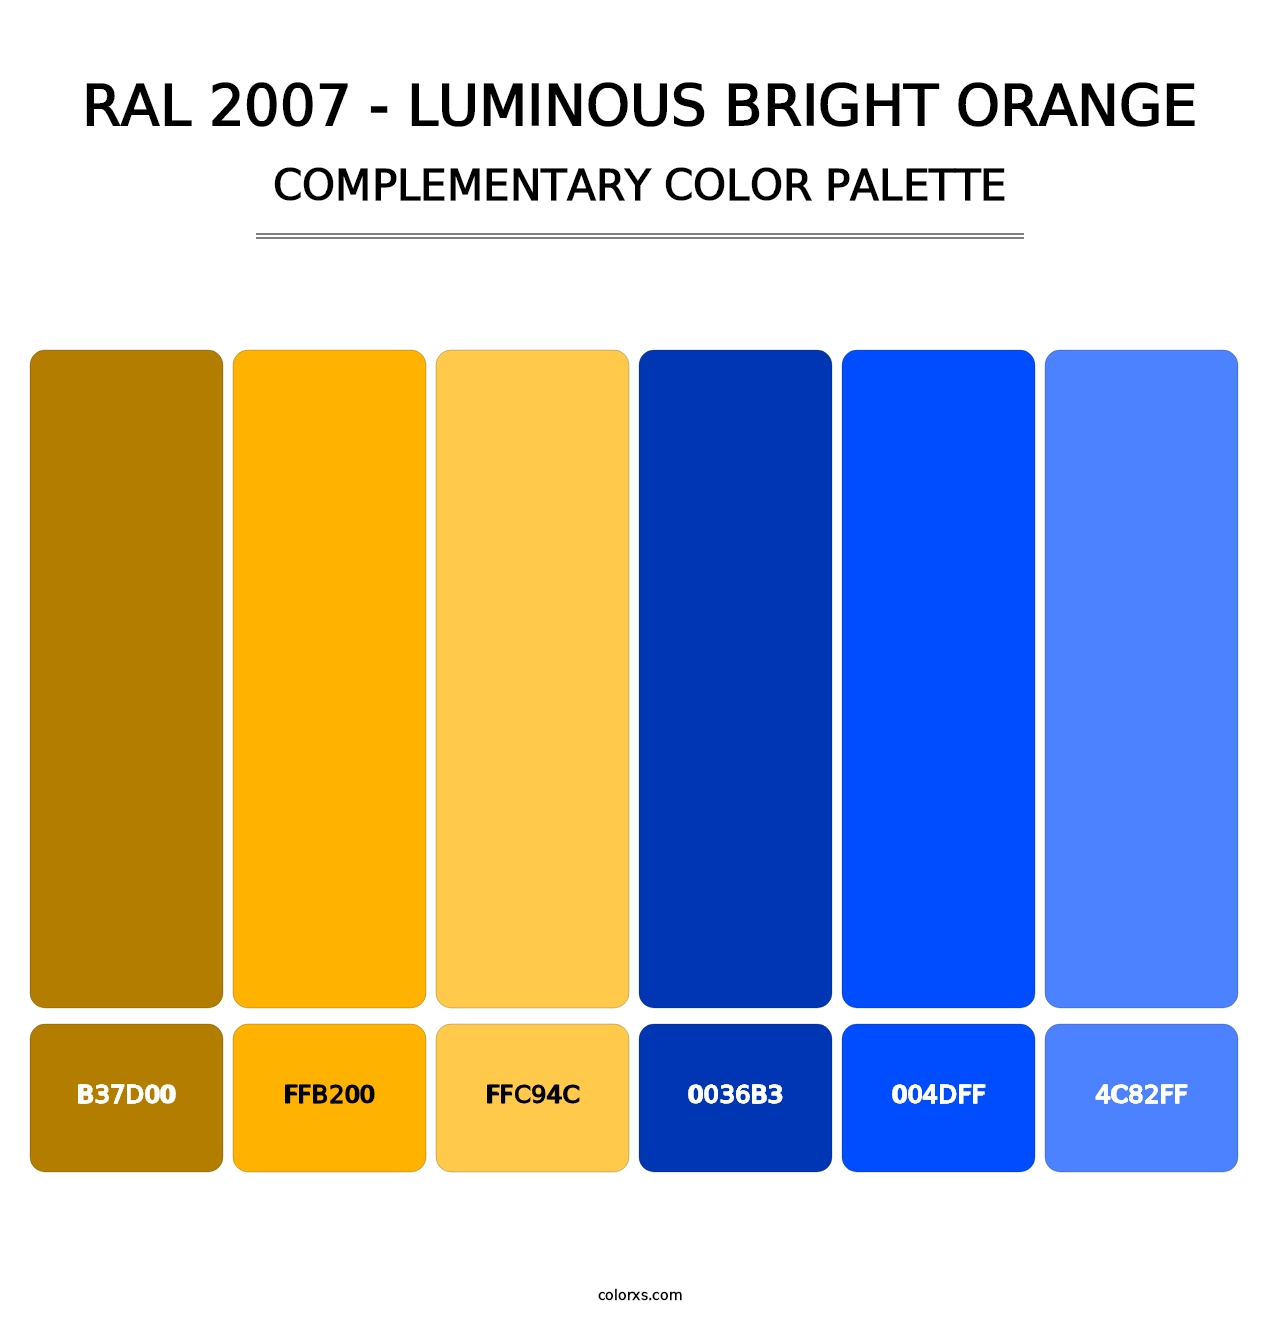 RAL 2007 - Luminous Bright Orange - Complementary Color Palette